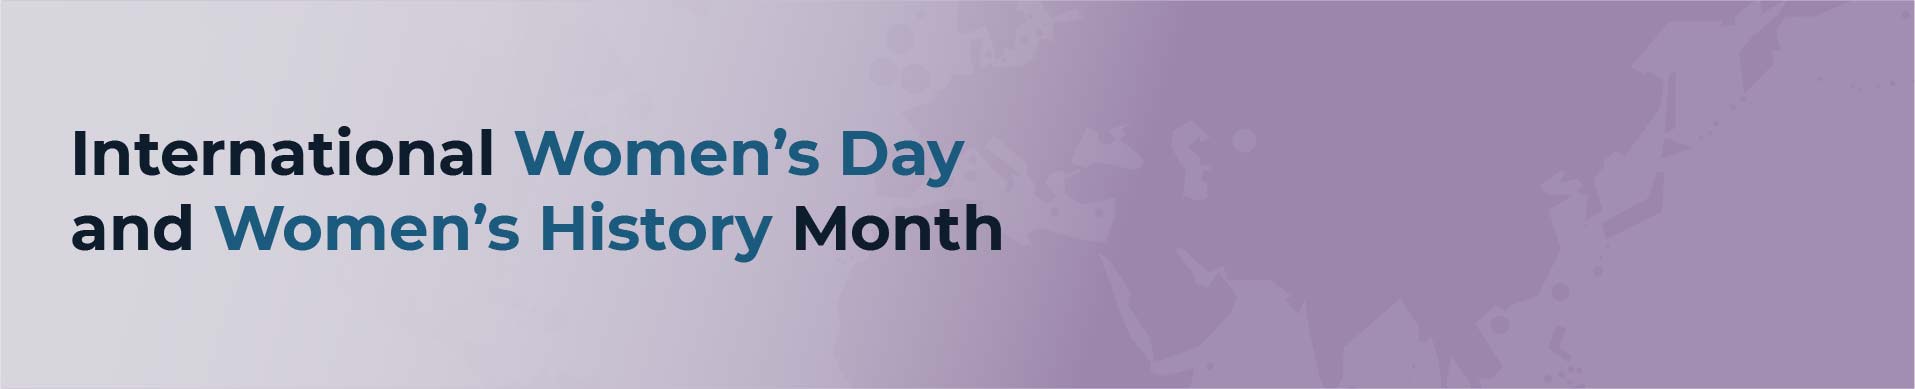 International Women's Day and Women's History Month